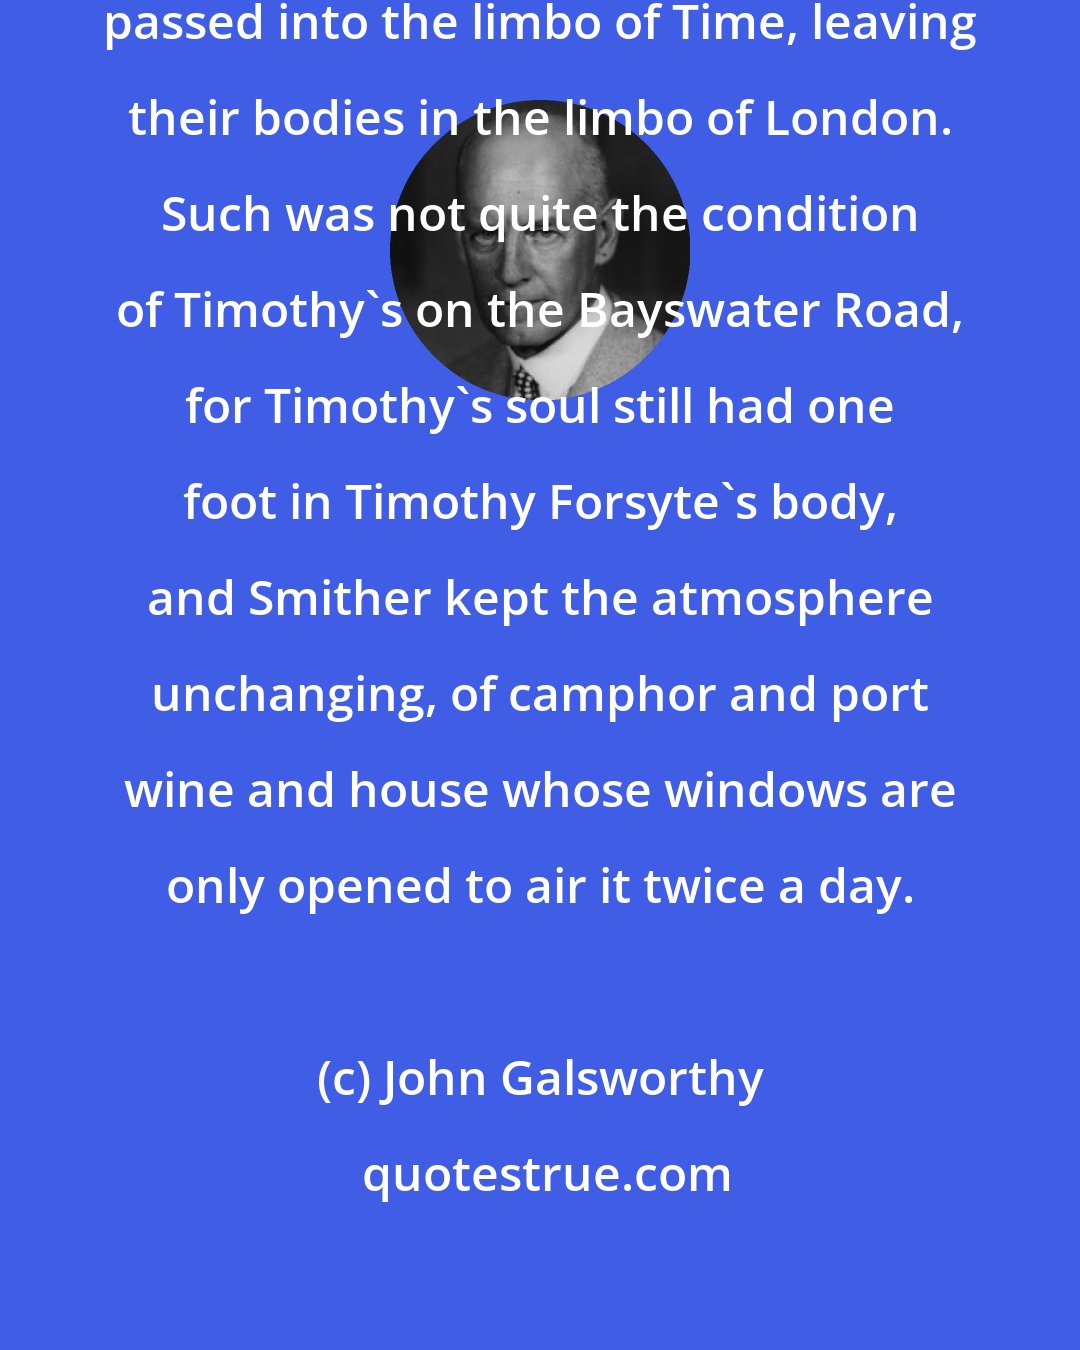 John Galsworthy: There are houses whose souls have passed into the limbo of Time, leaving their bodies in the limbo of London. Such was not quite the condition of Timothy's on the Bayswater Road, for Timothy's soul still had one foot in Timothy Forsyte's body, and Smither kept the atmosphere unchanging, of camphor and port wine and house whose windows are only opened to air it twice a day.